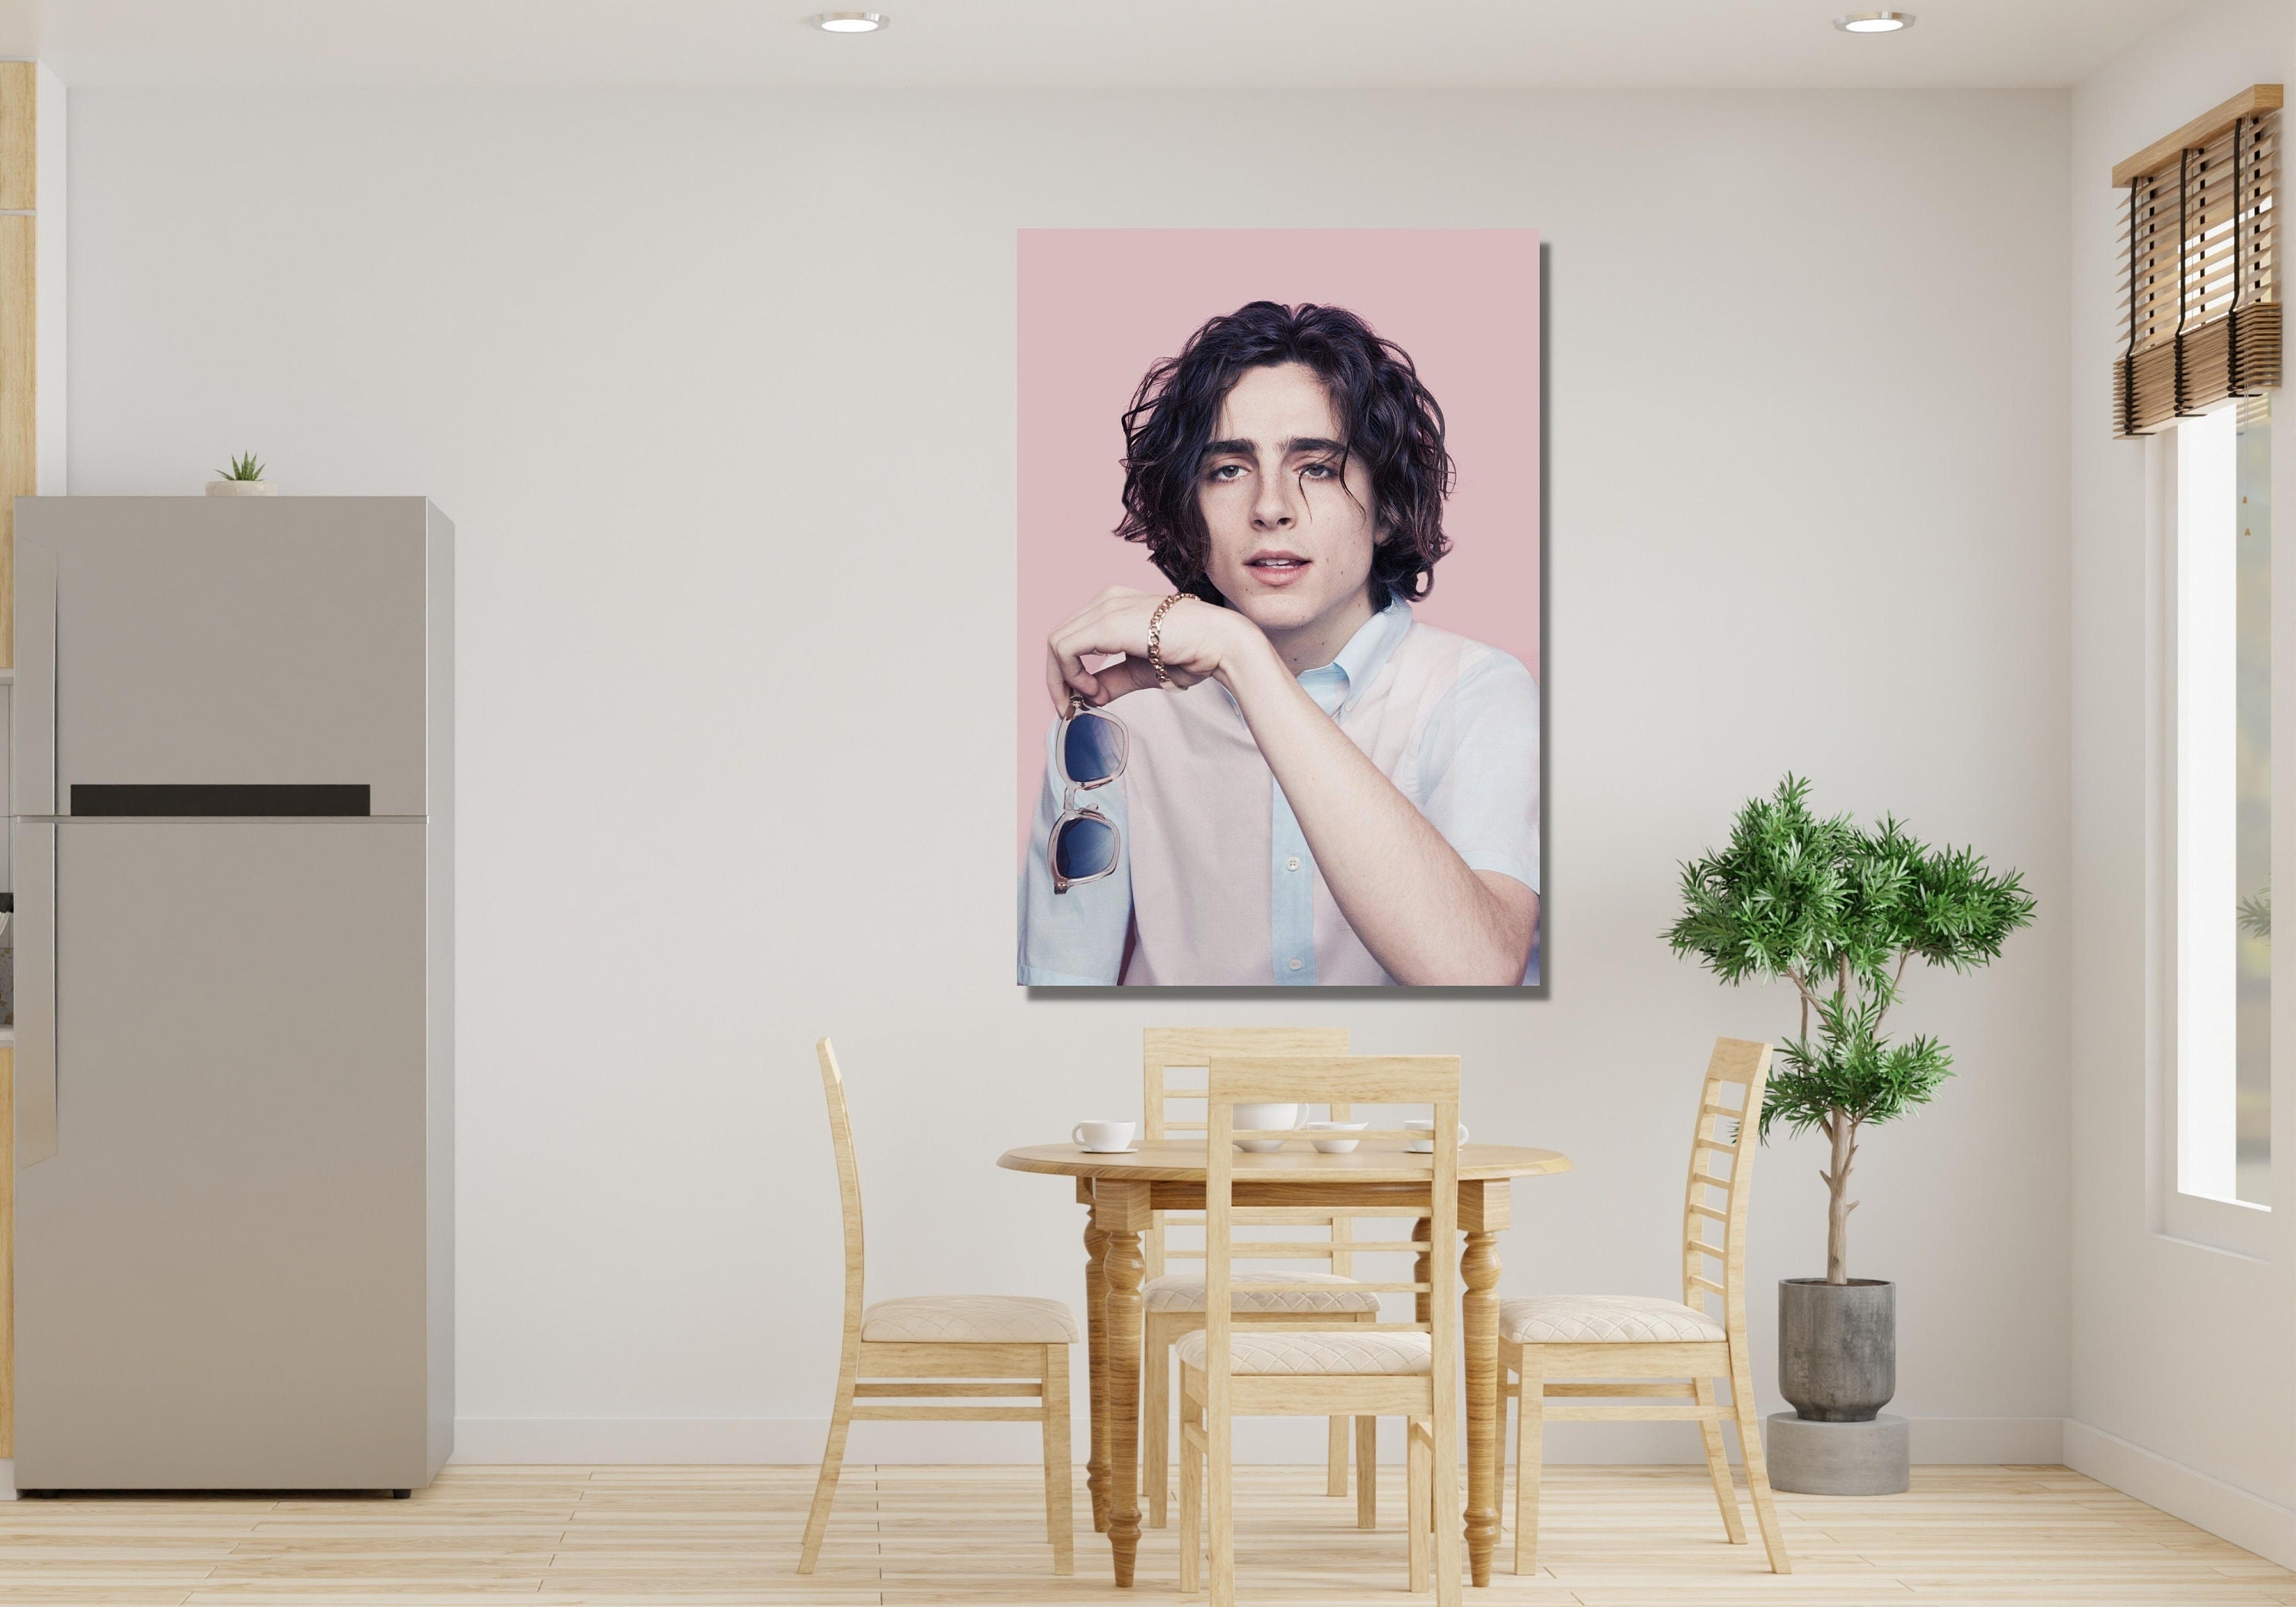  BLUDUG Timothee Chalamet Actor Poster (2) Canvas Painting Wall  Art Poster for Bedroom Living Room Decor12x18inch(30x45cm): Posters & Prints